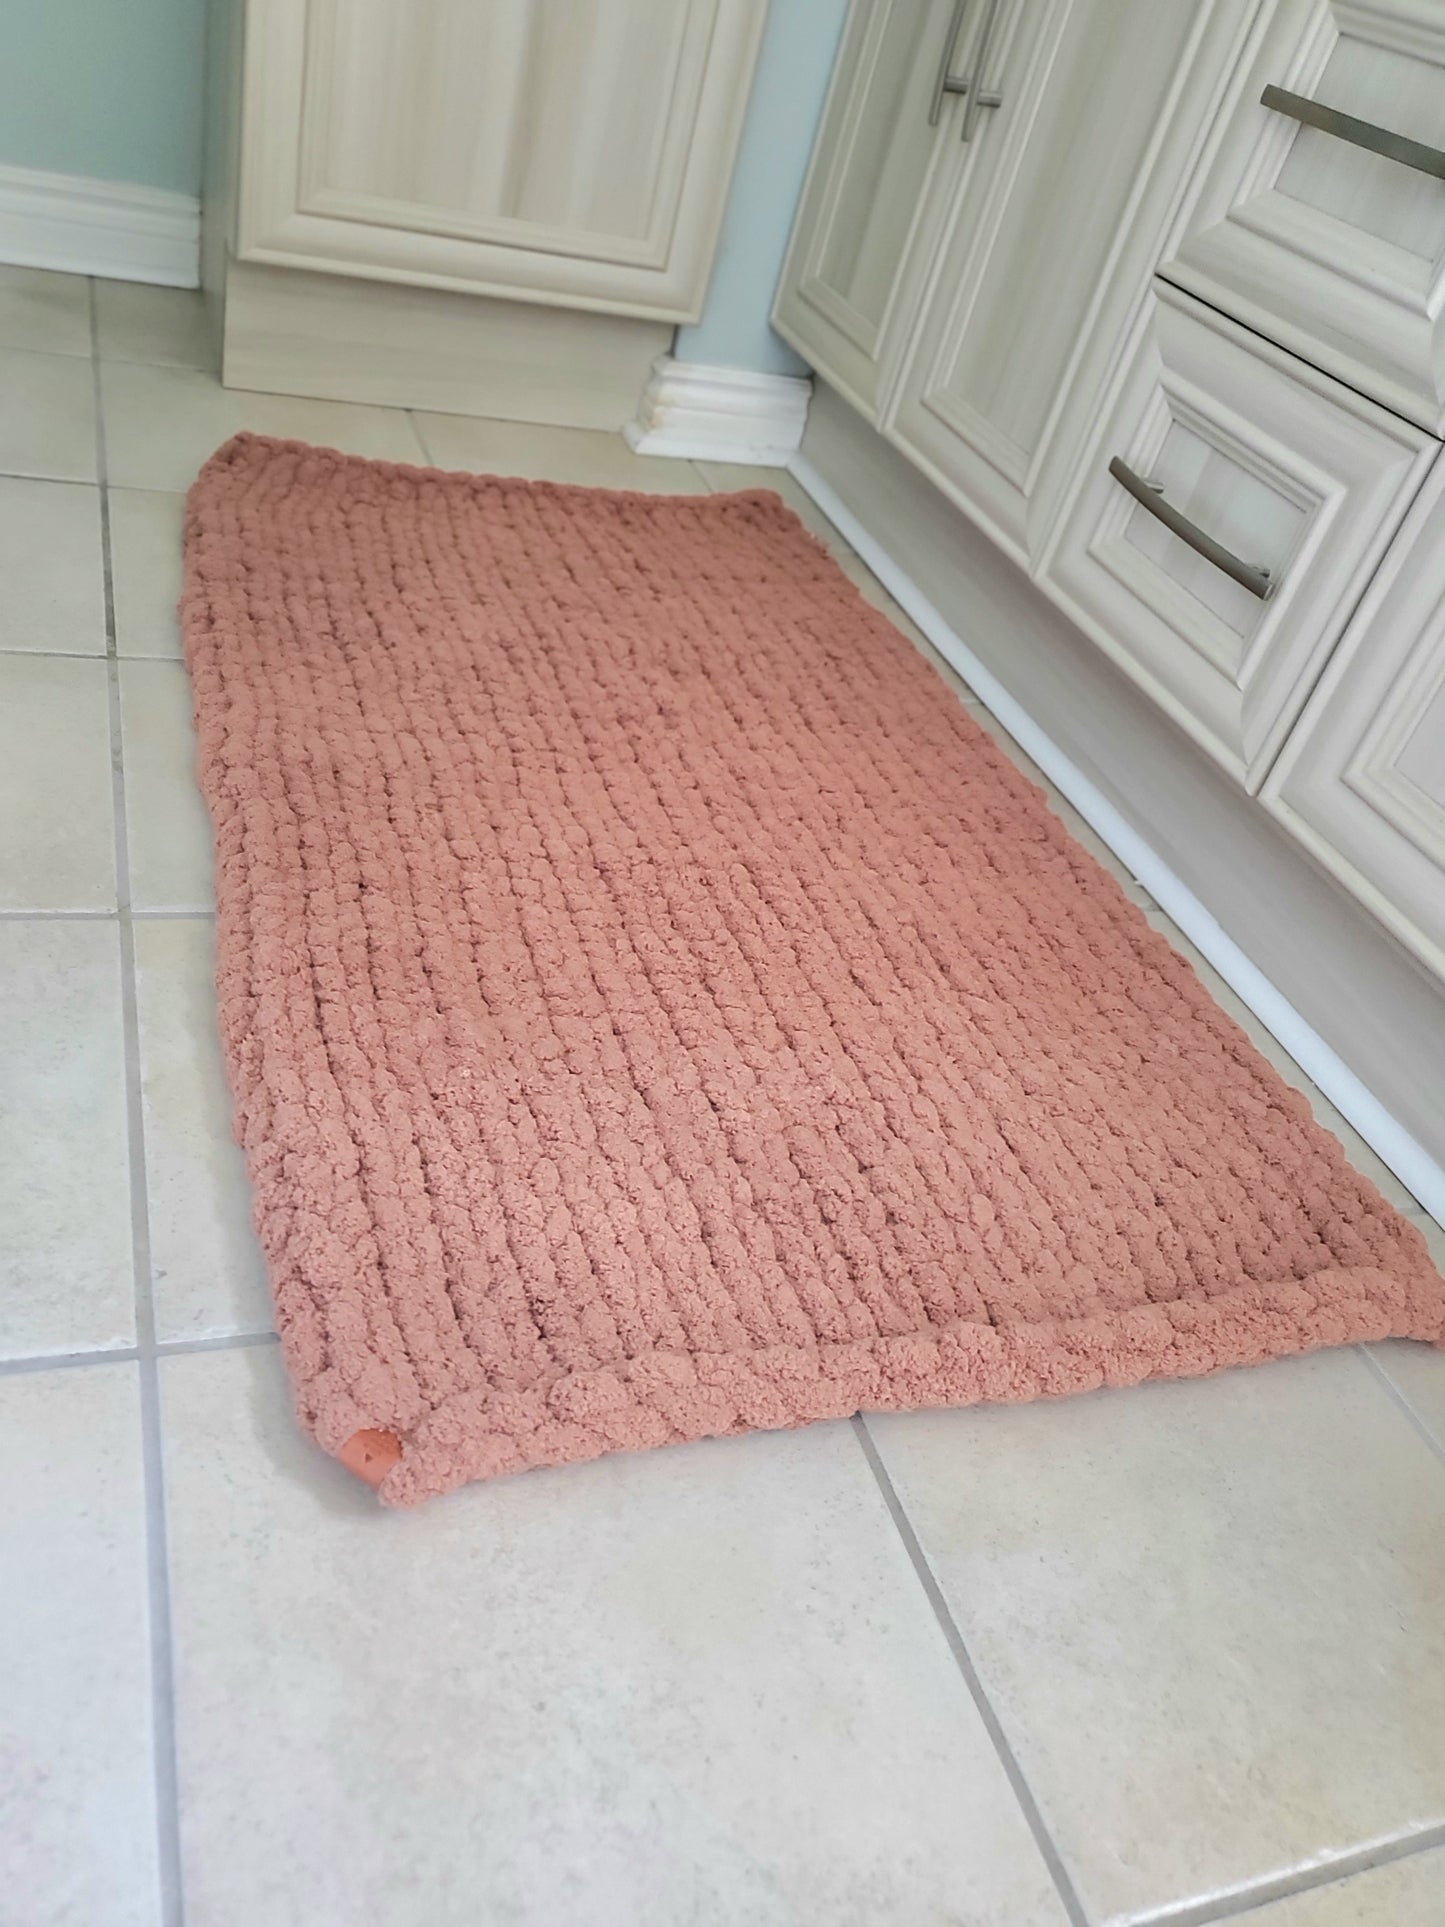 Luxurious Plush Chenille Wool Bathroom Mat - Soft and Cozy, Perfect for Your Home!